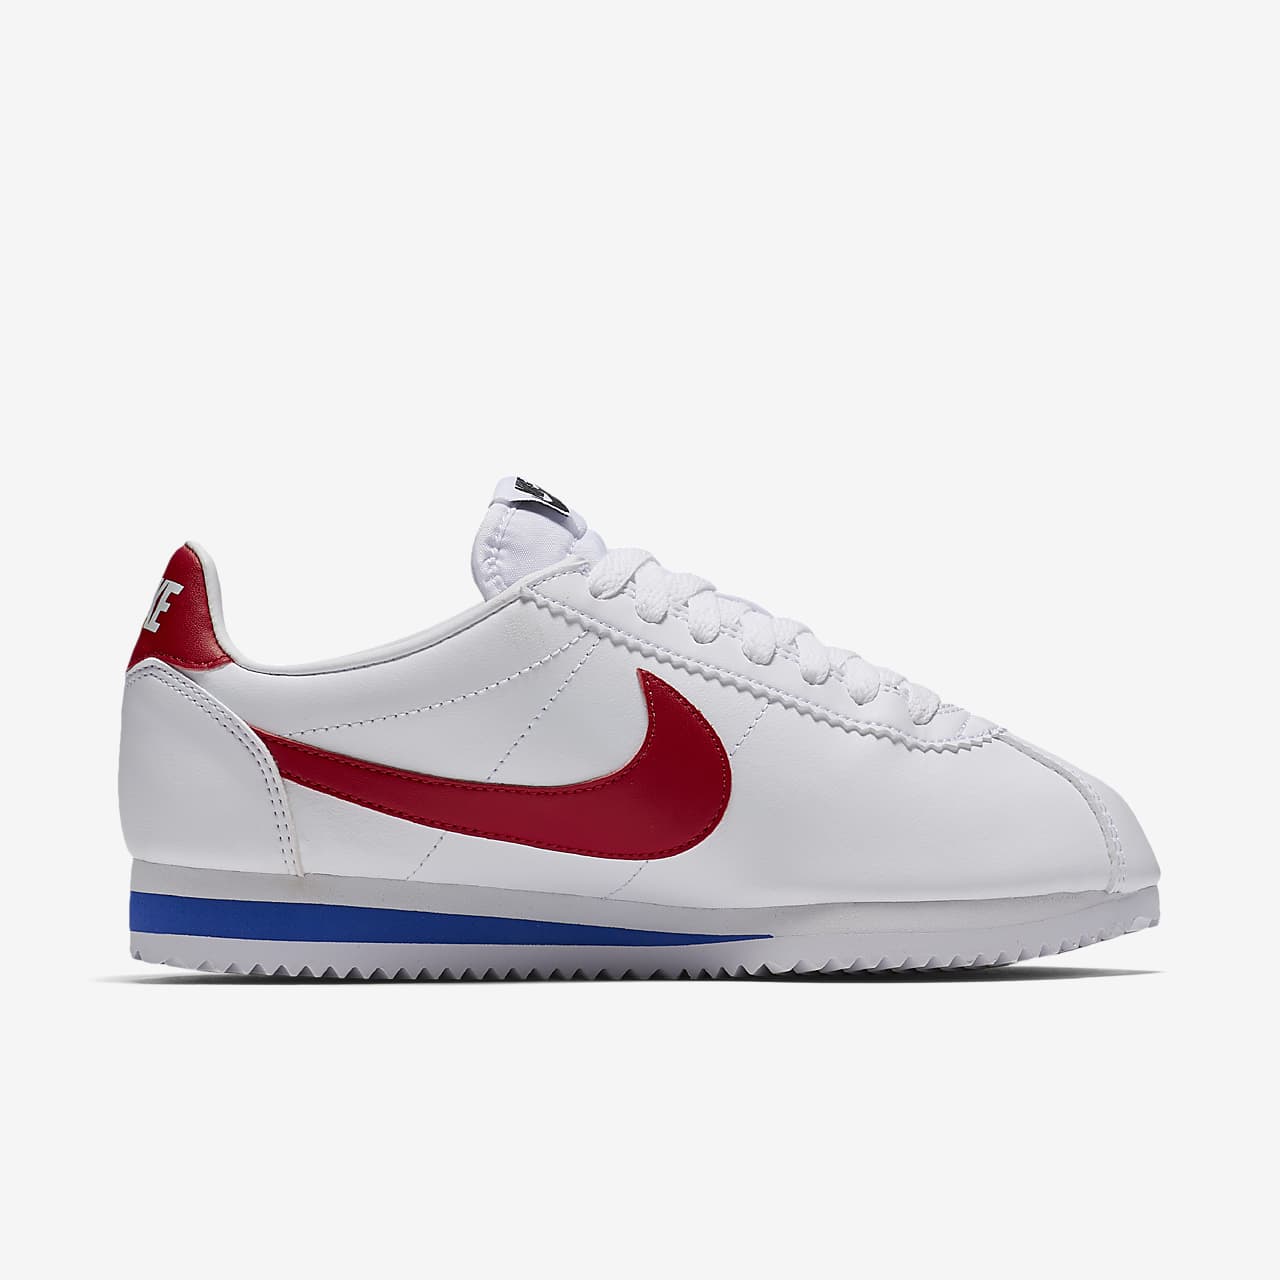 nike classic cortez review